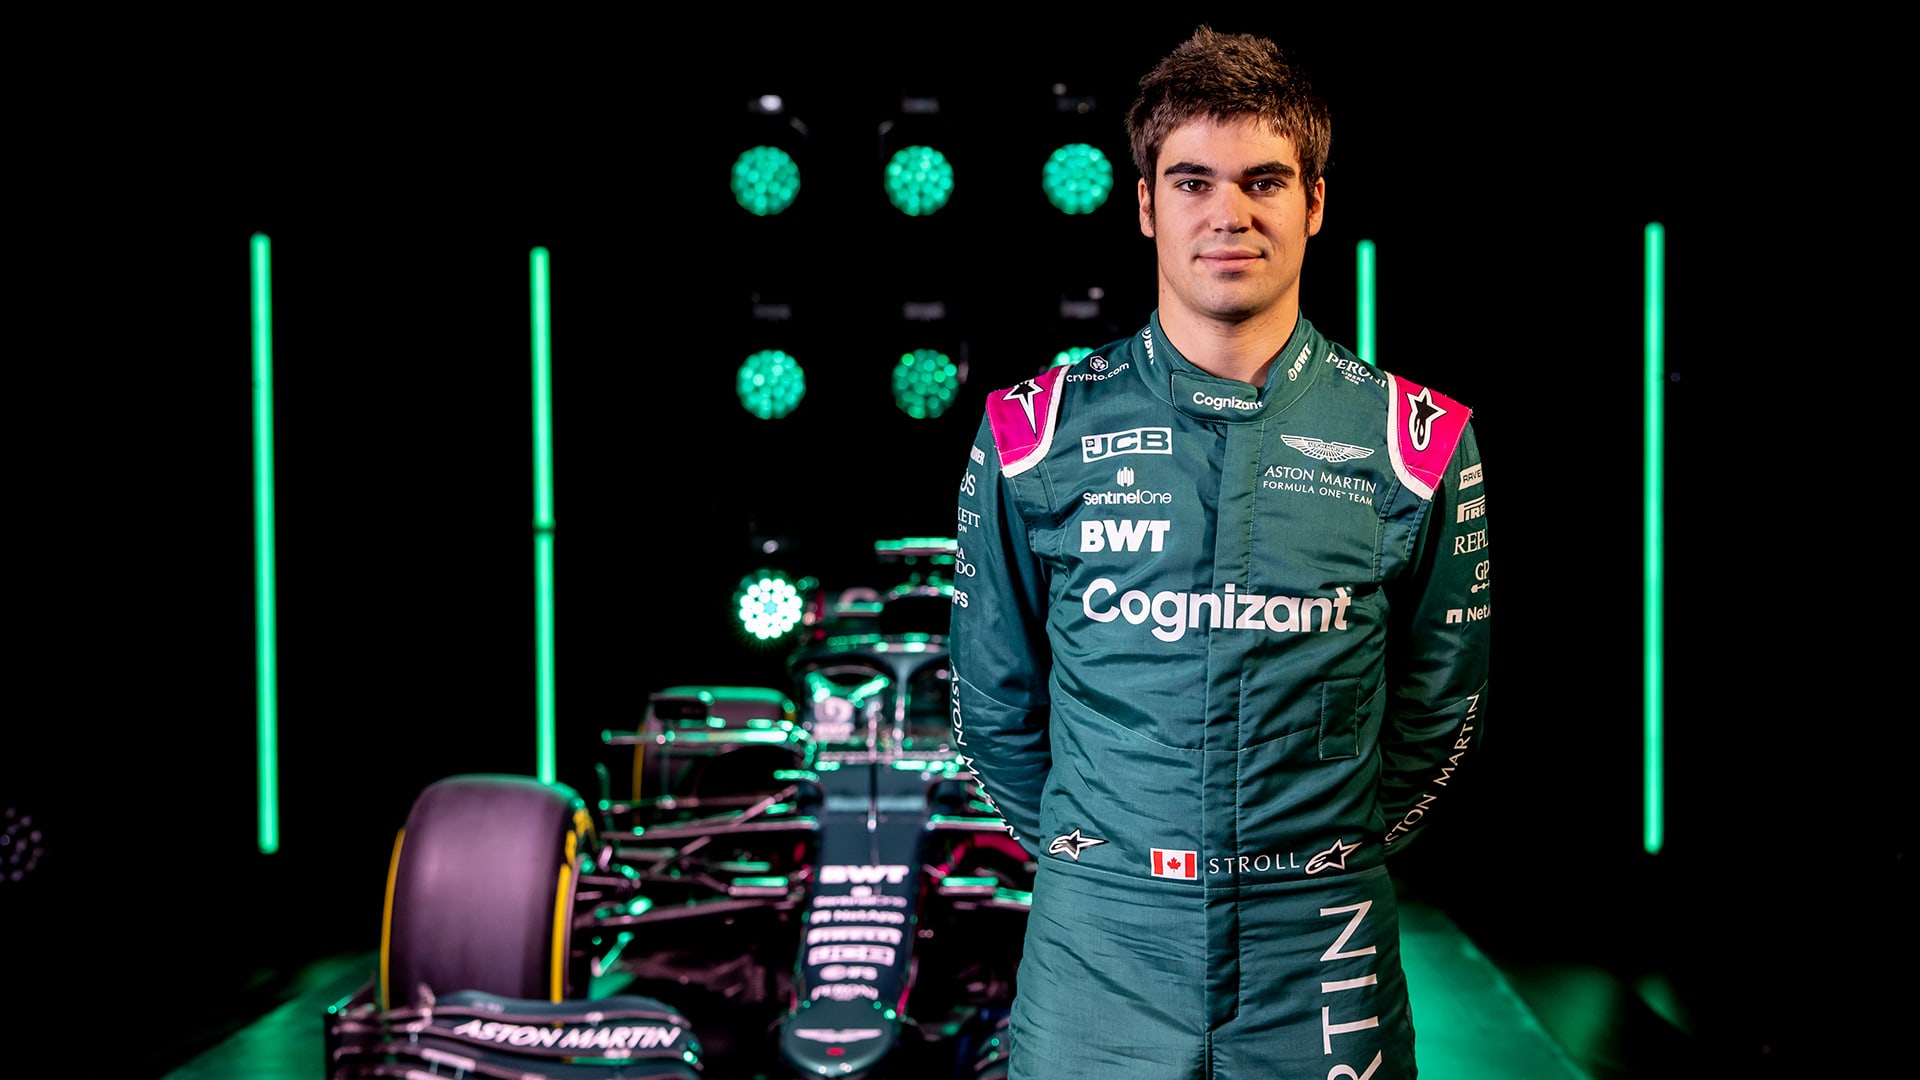 Lance Stroll sets target of P3 in the constructors' for Aston Martin's  first year back in F1 | Formula 1®